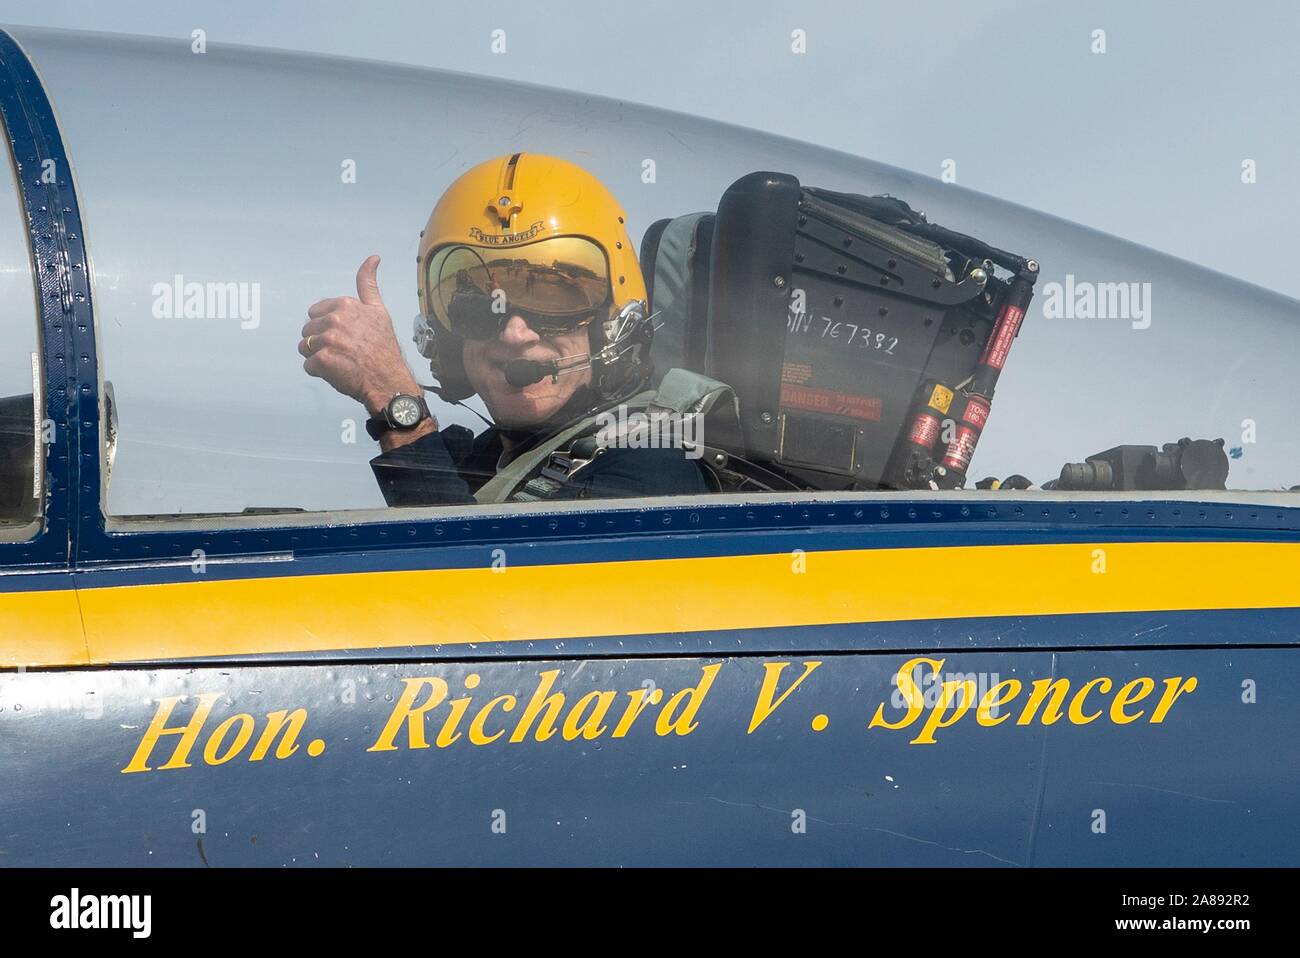 U.S. Navy Secretary Richard V. Spencer gives a thumbs up as he rides the back seat of a Navy F/A-18 Hornet fighter aircraft during a visit to the Blue Angles Flight Demonstration Squadron at Naval Air Station Pensacola November 5, 2019 in Pensacola, Florida. Stock Photo